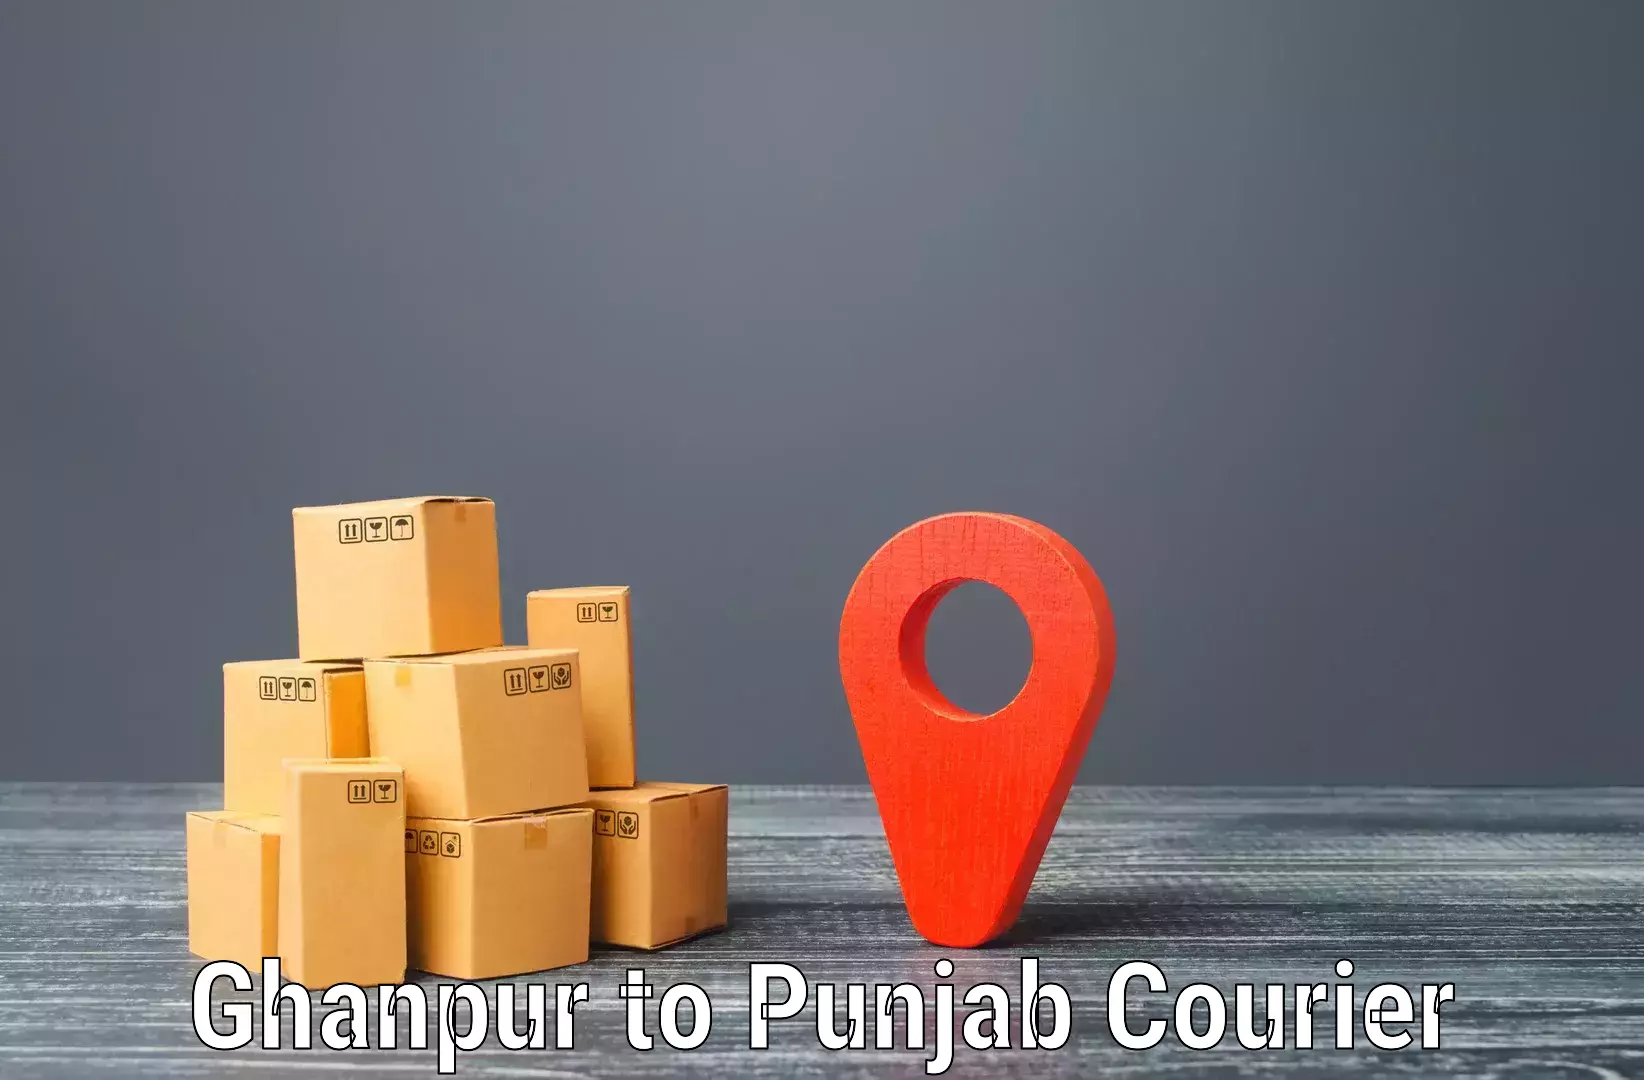 Affordable parcel rates Ghanpur to Dera Bassi